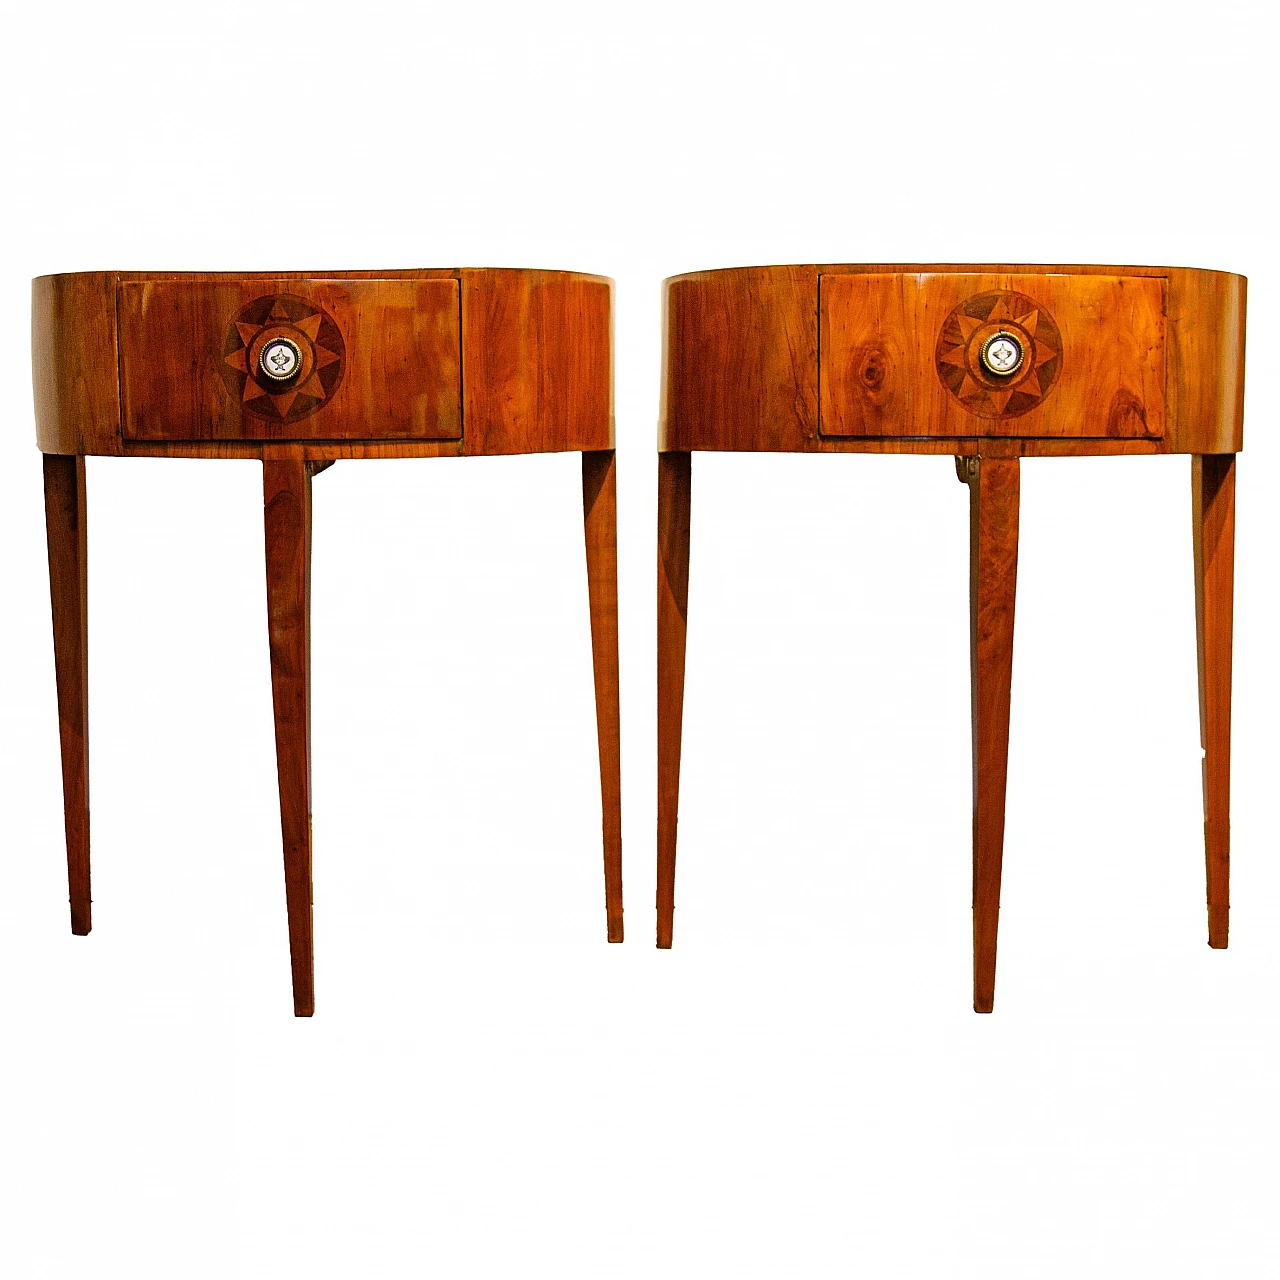 Pair of Vicenza half-moon cherry bedside tables, late 18th century 1